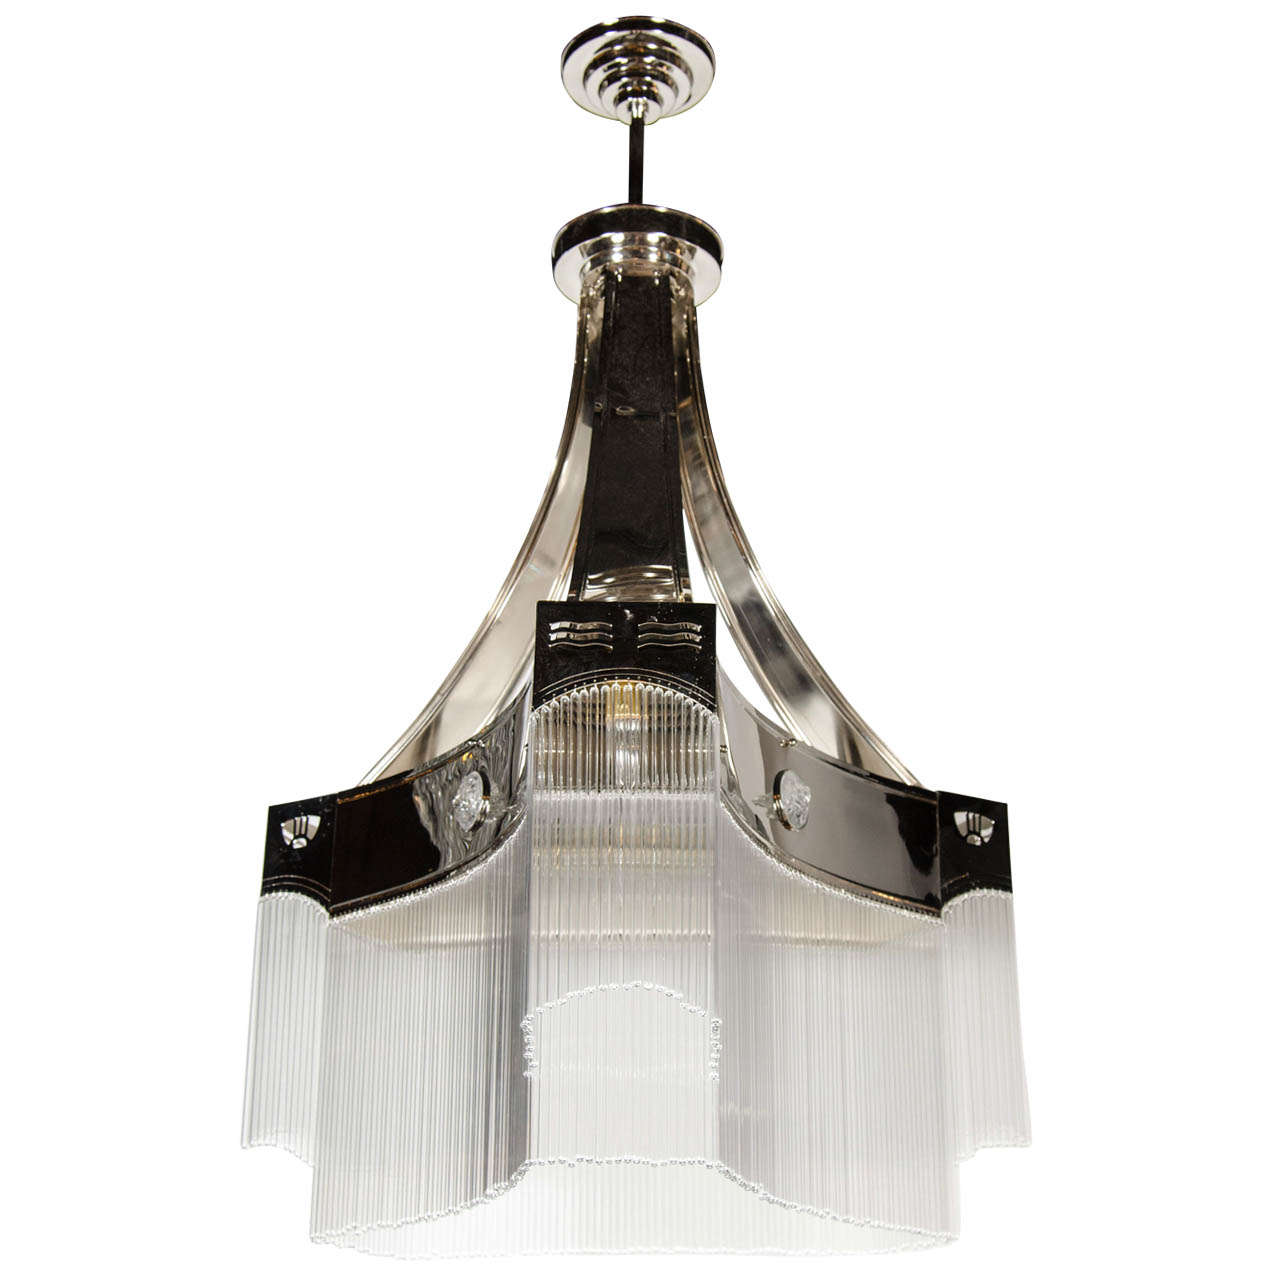 Spectacular French Art Deco Style Chandelier in the manner of Joseph Hoffmann